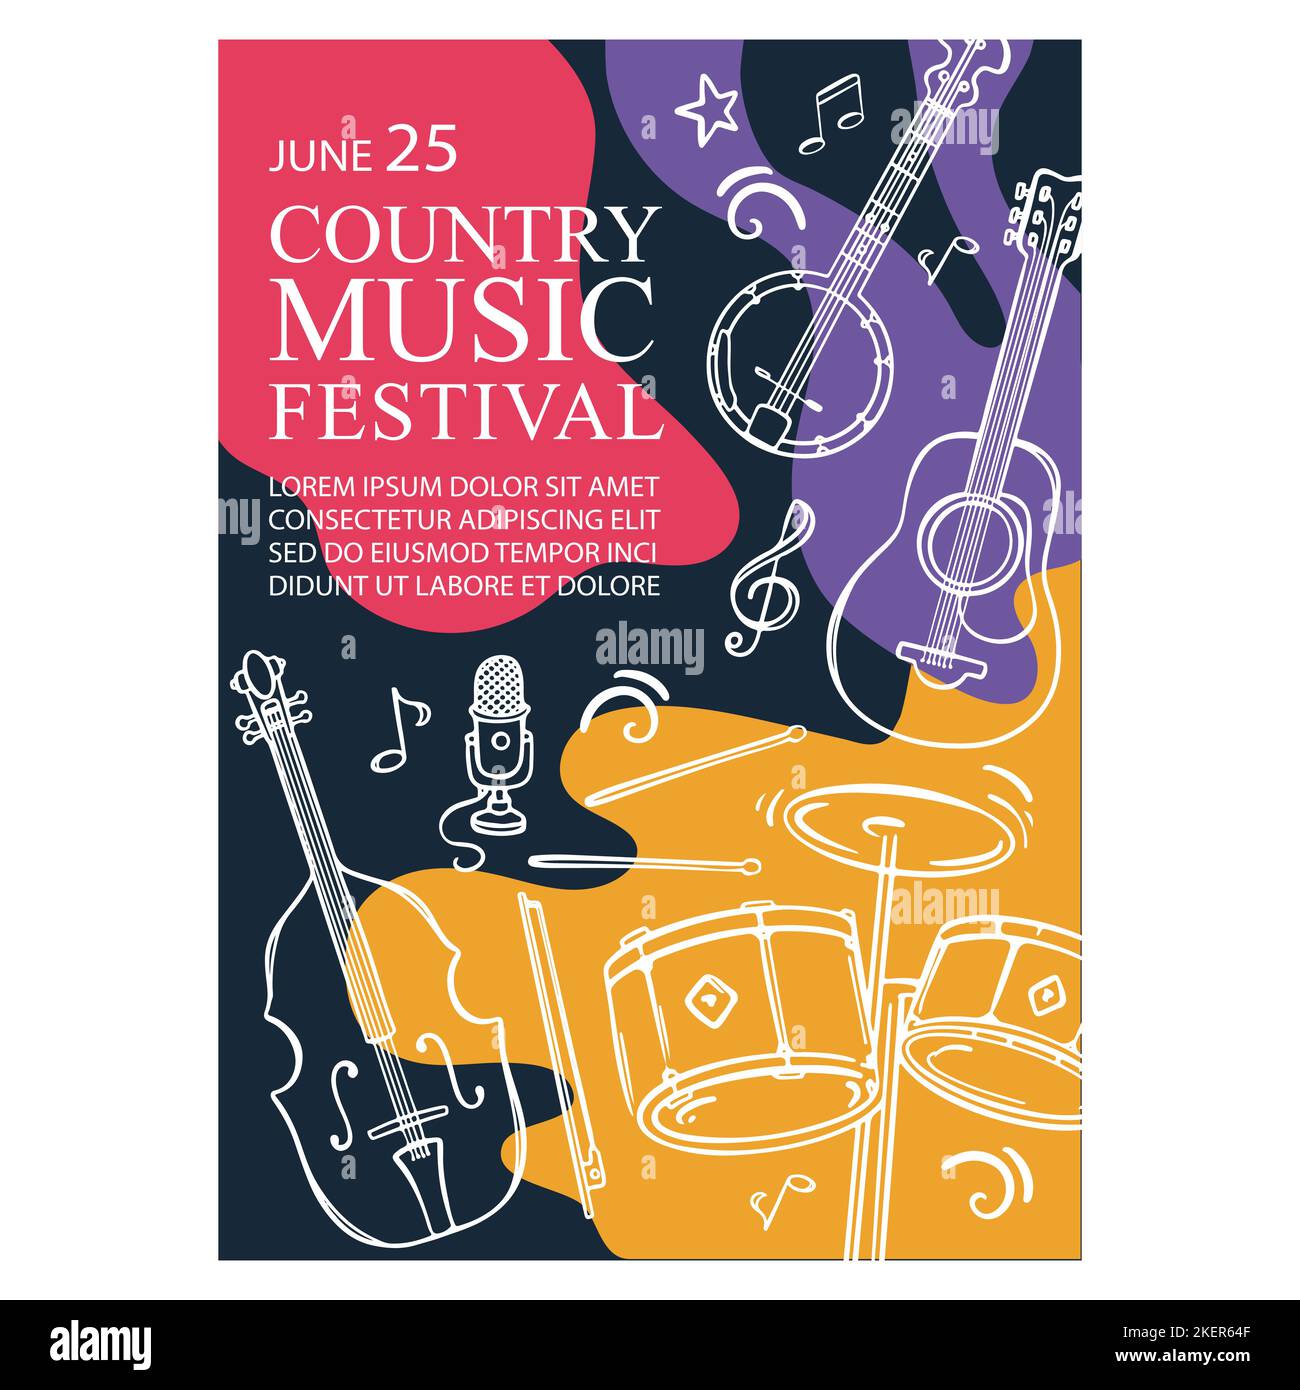 COUNTRY MUSIC FEST Vertical Banner Concert Poster With Cello Guitar Banjo And Drums Invitation Text On Abstract Colorful Background Hand Drawn Vector Stock Vector